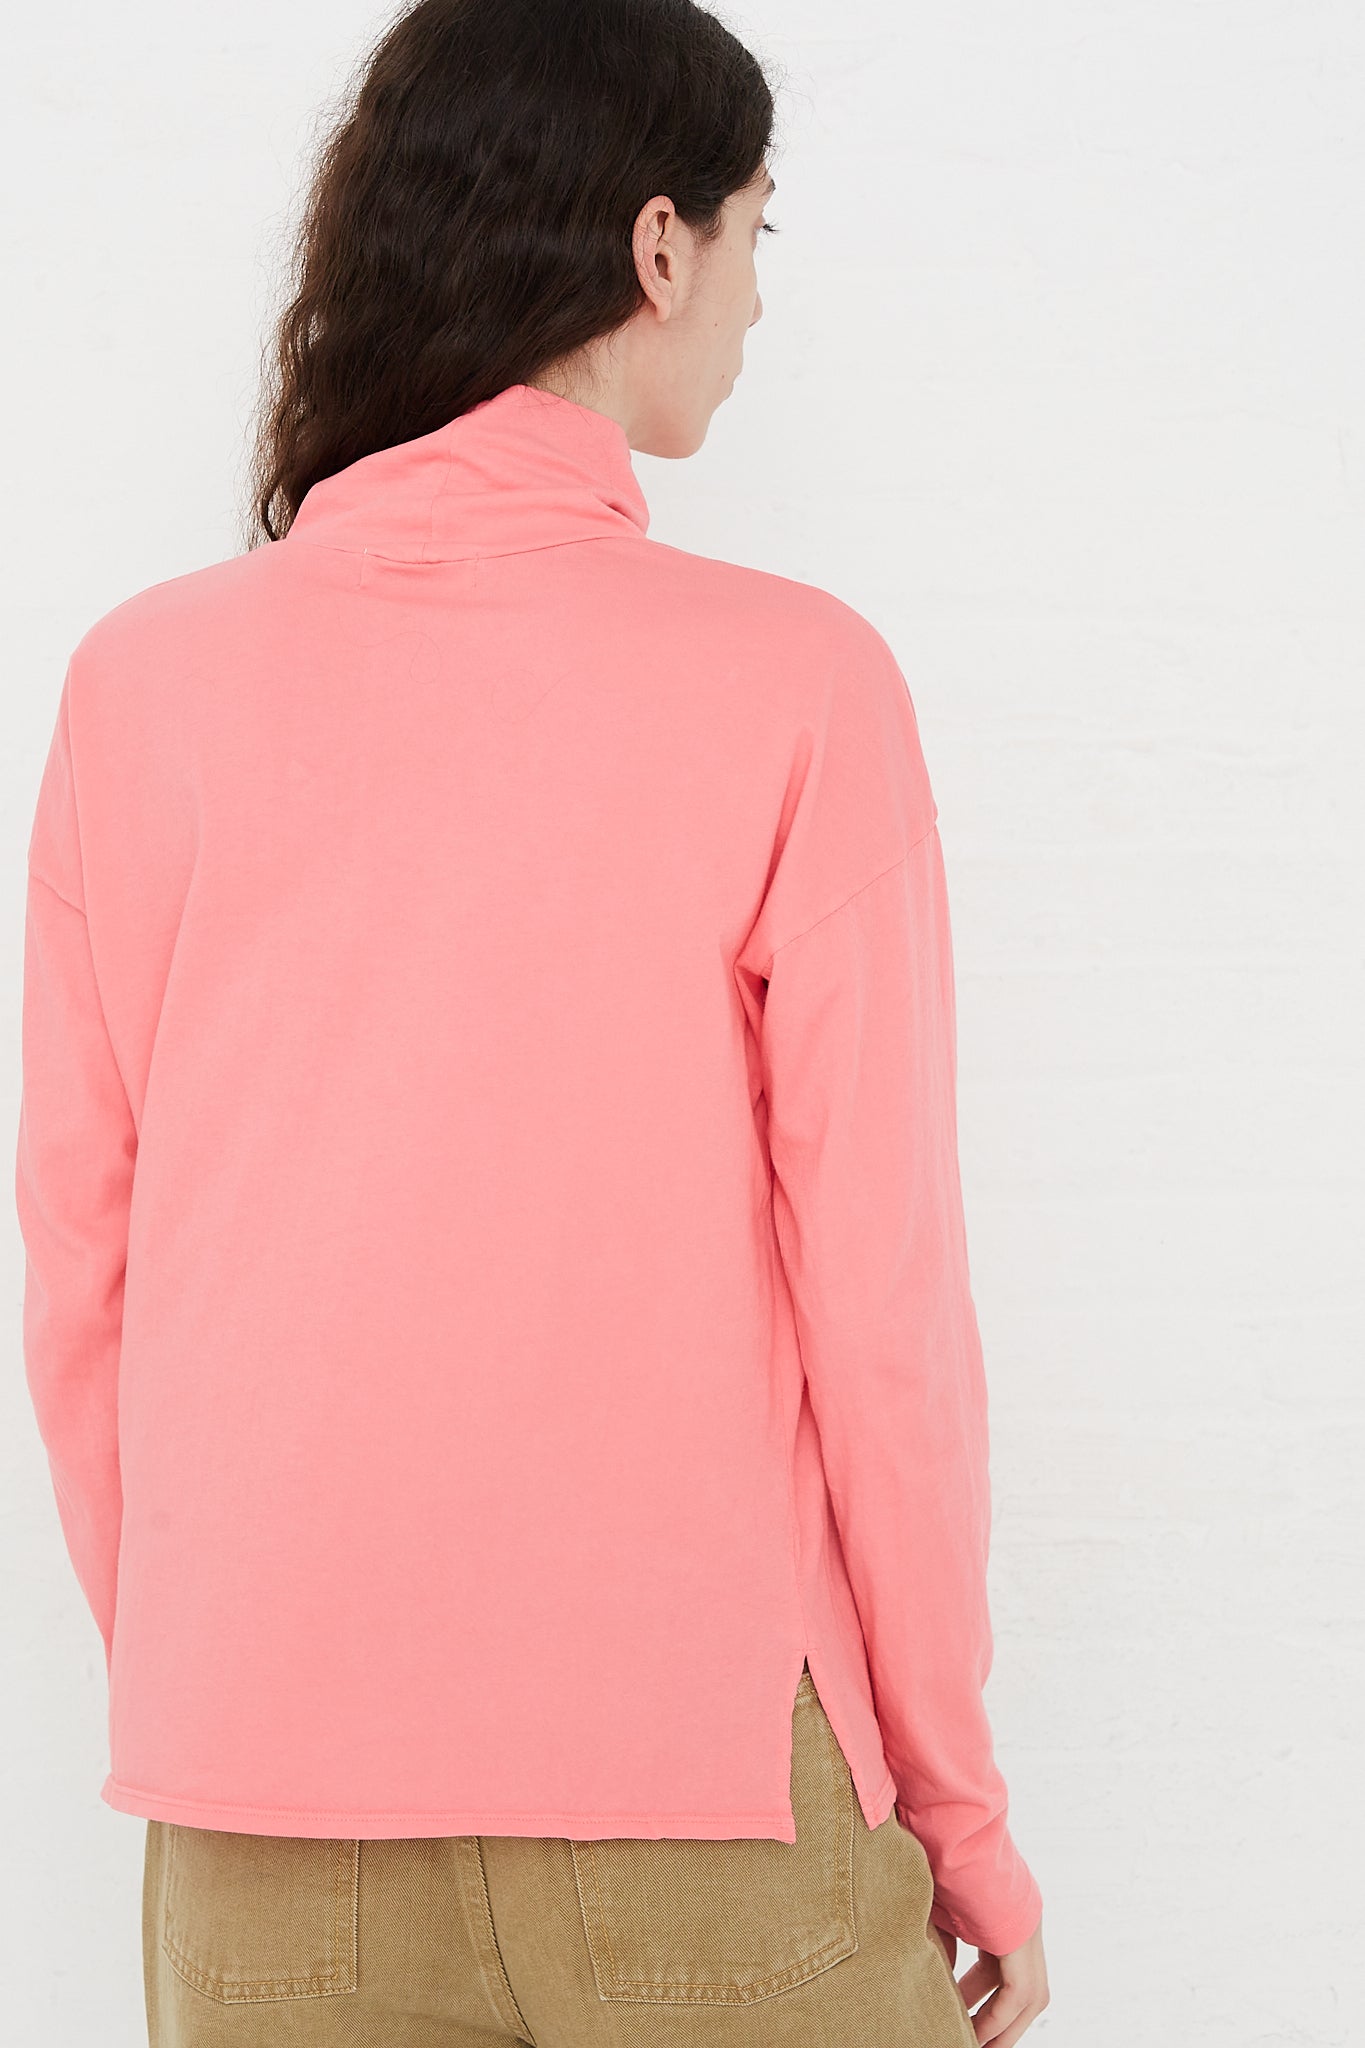 A model wearing a Calla Pink Cotton Turtleneck Shirt from the B Sides brand.